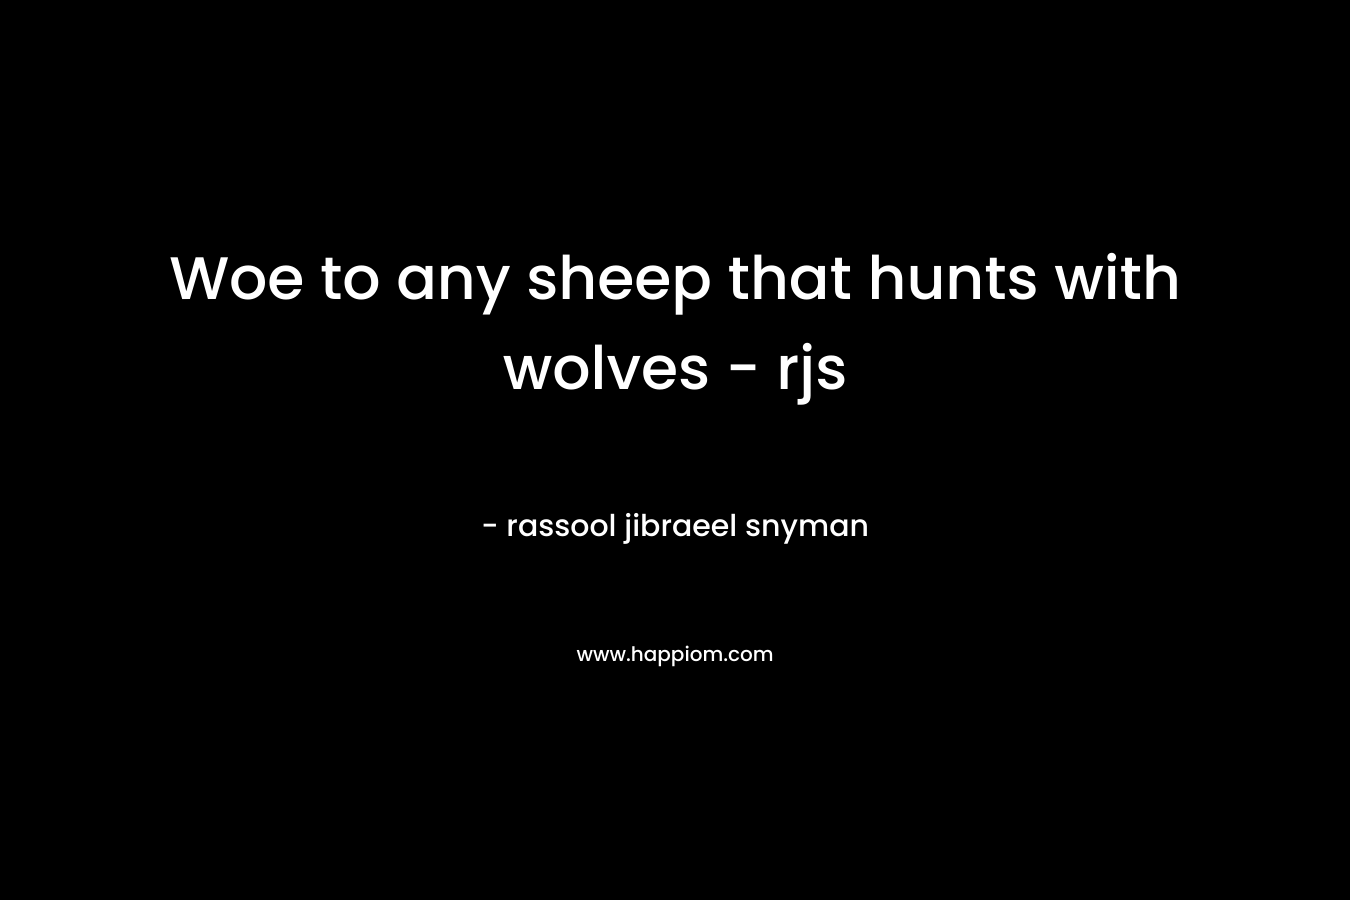 Woe to any sheep that hunts with wolves – rjs – rassool jibraeel snyman